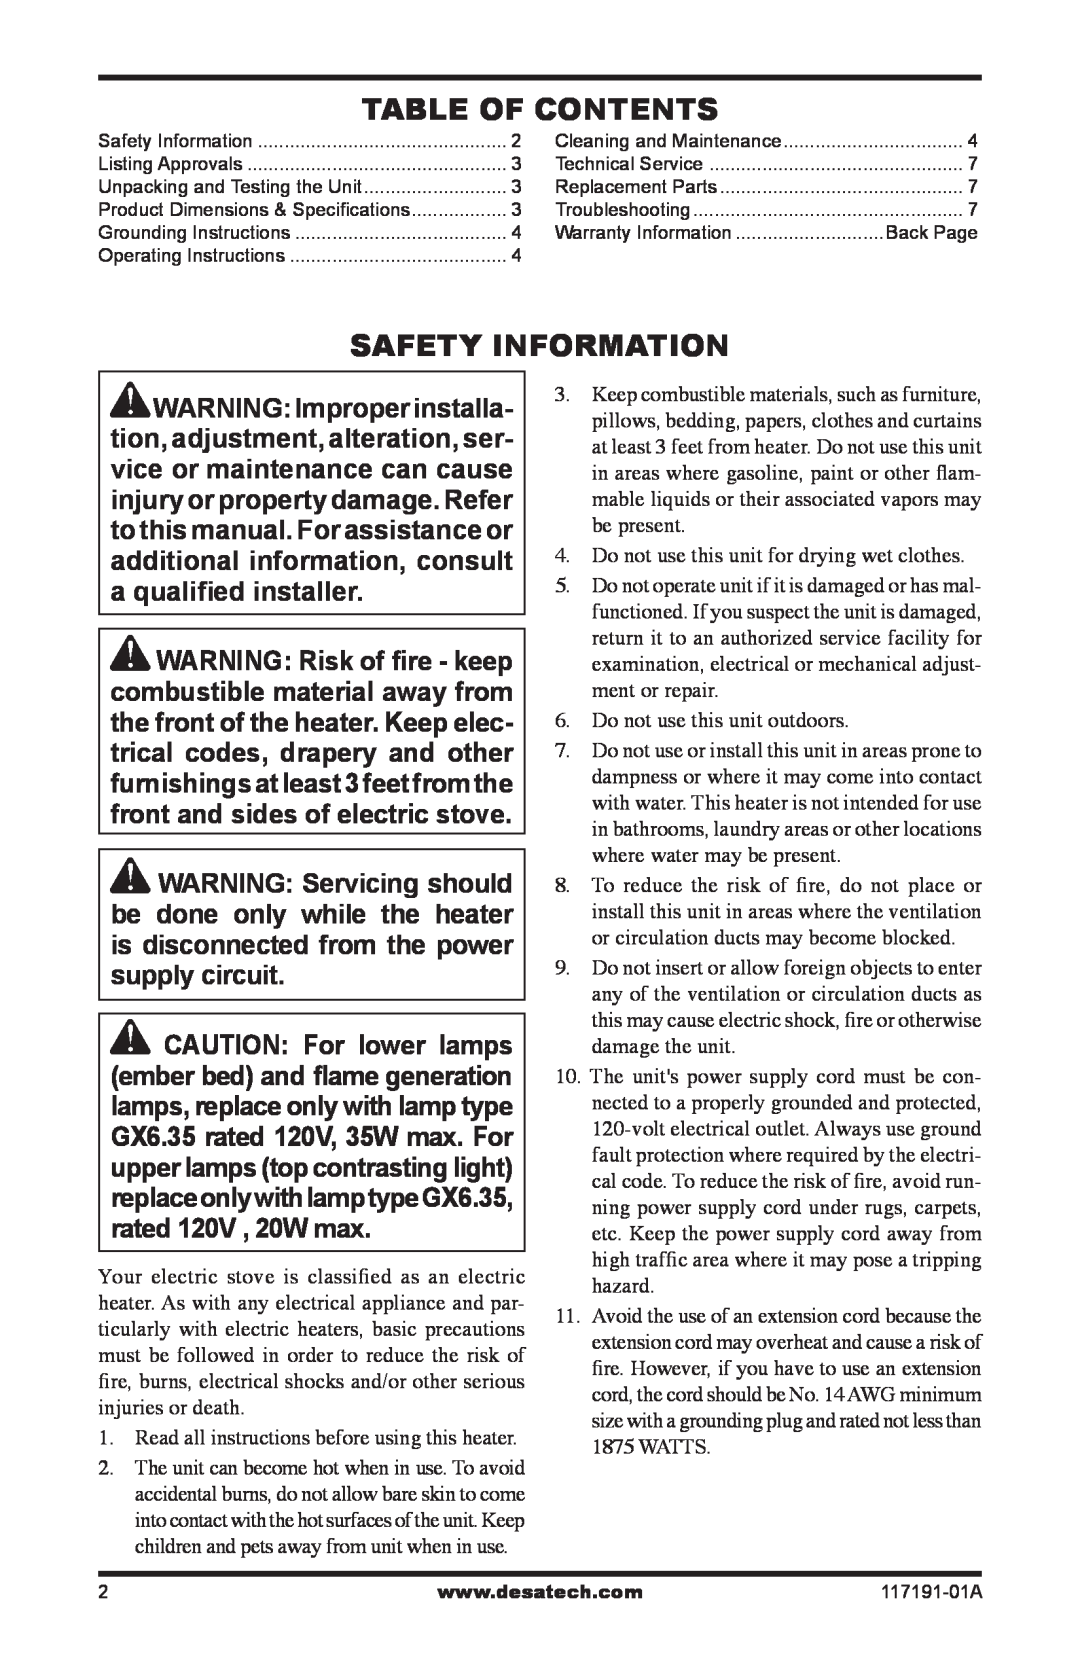 Desa CGESBM operation manual Table Of Contents, Safety Information 